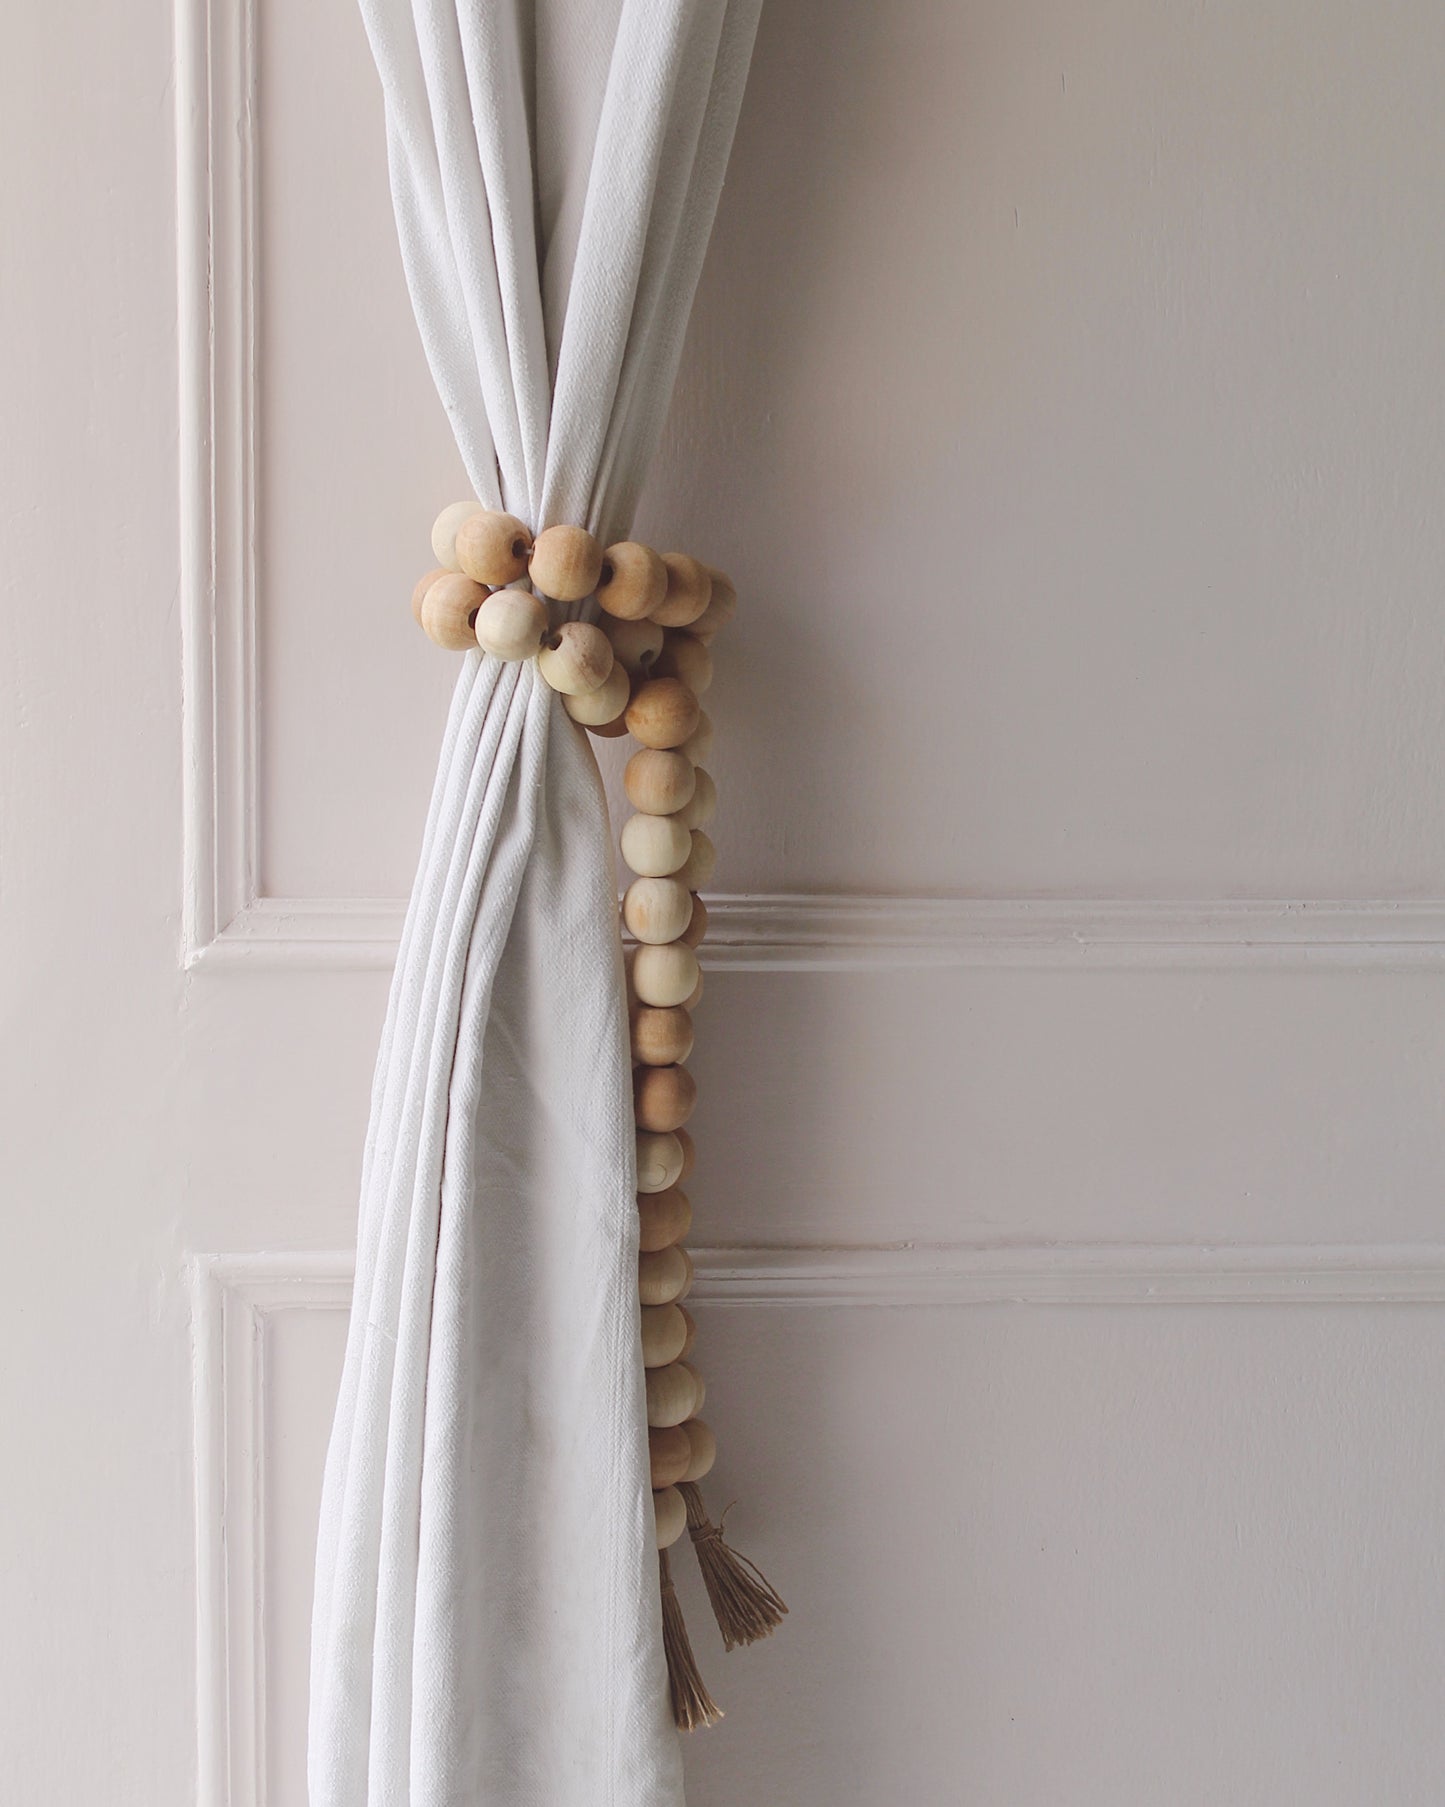 A bohemian style wooden beads tied to a curtain